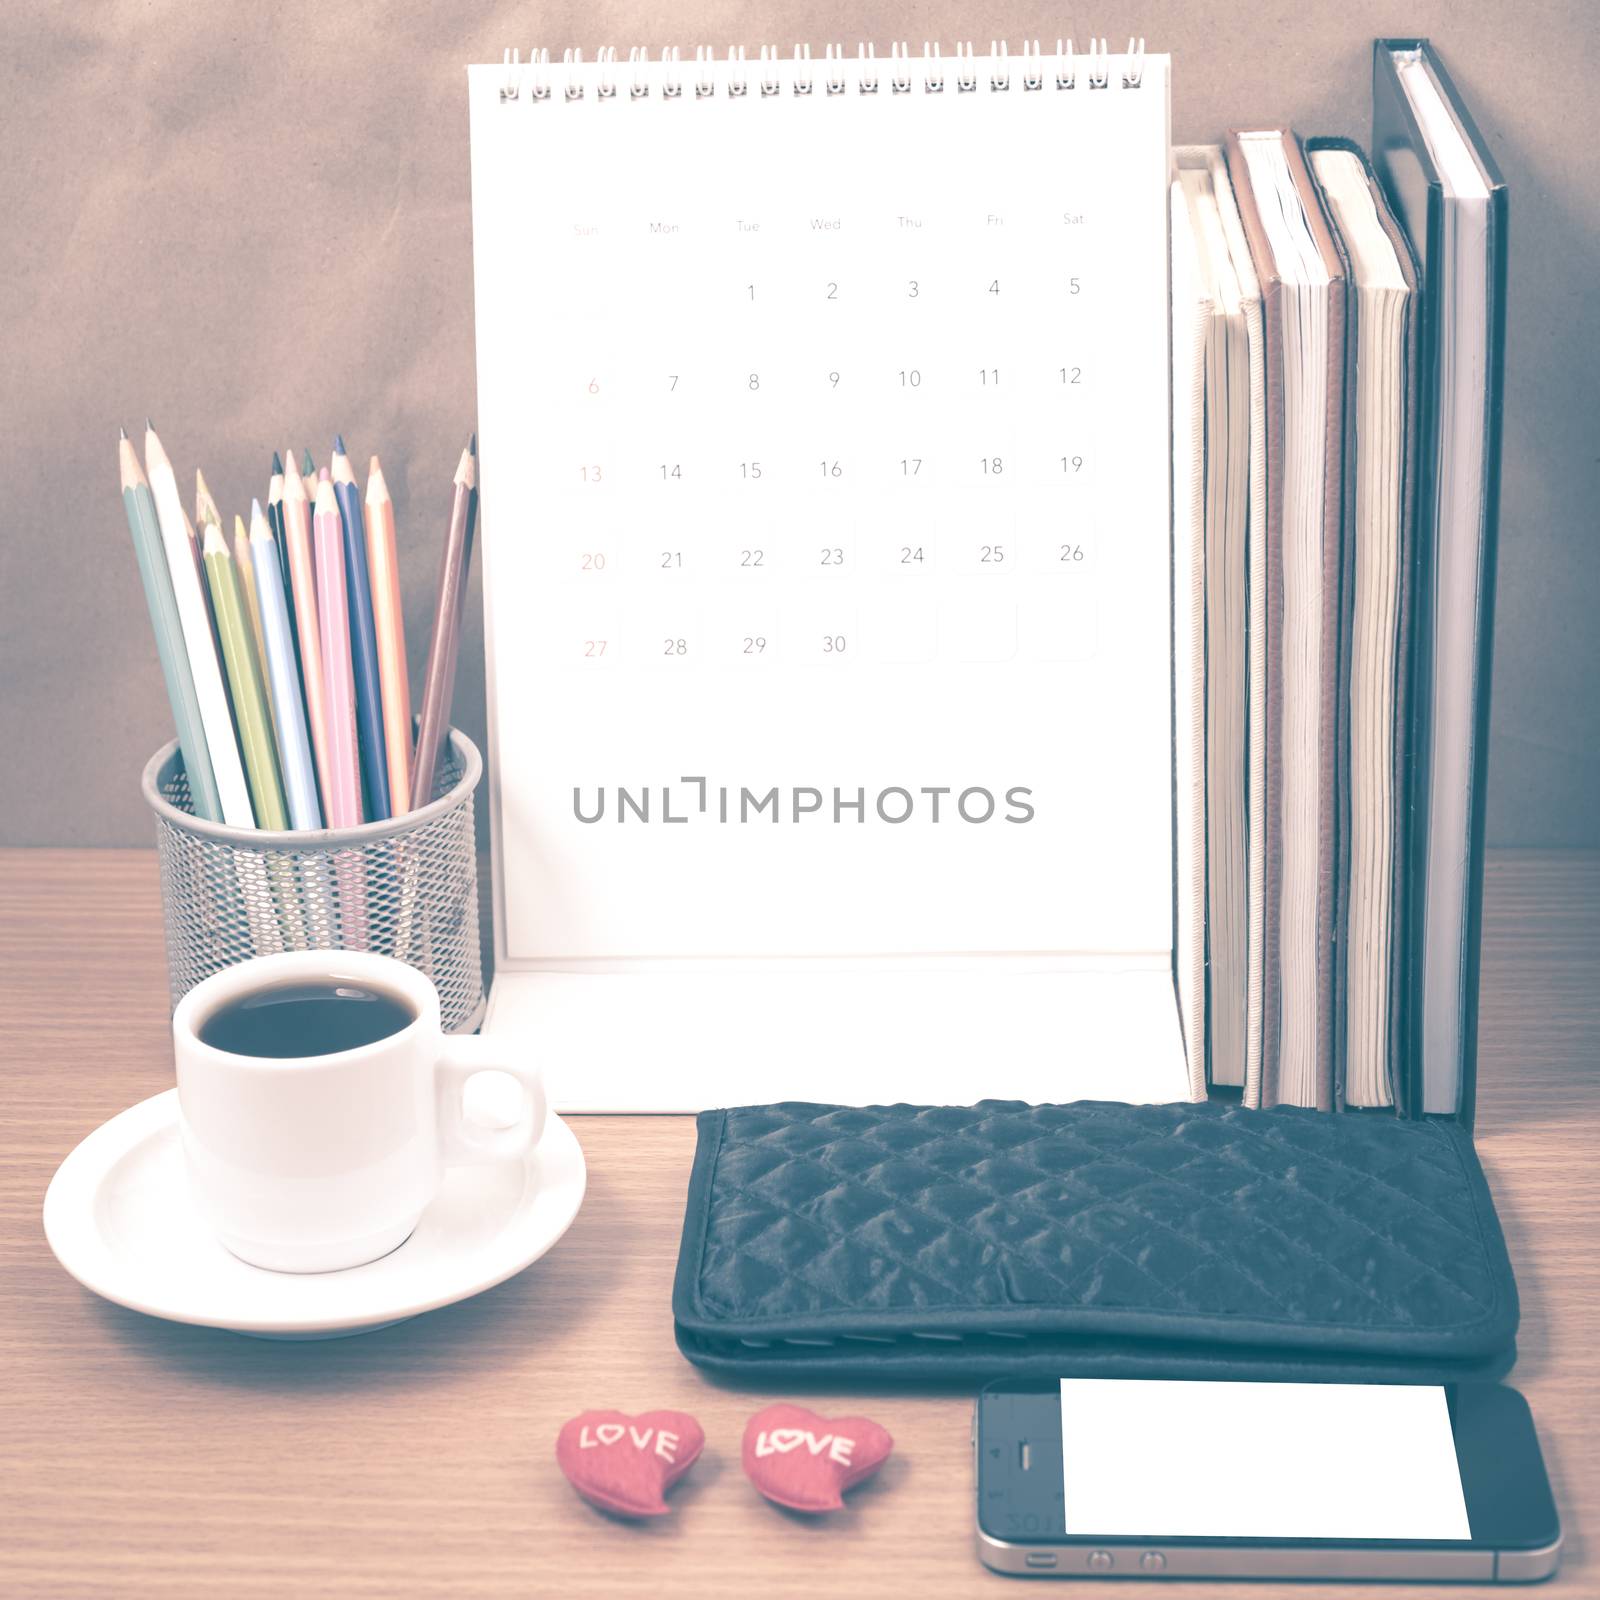 office desk : coffee with phone,wallet,calendar,heart,color pencil box,stack of book,heart on wood background vintage style